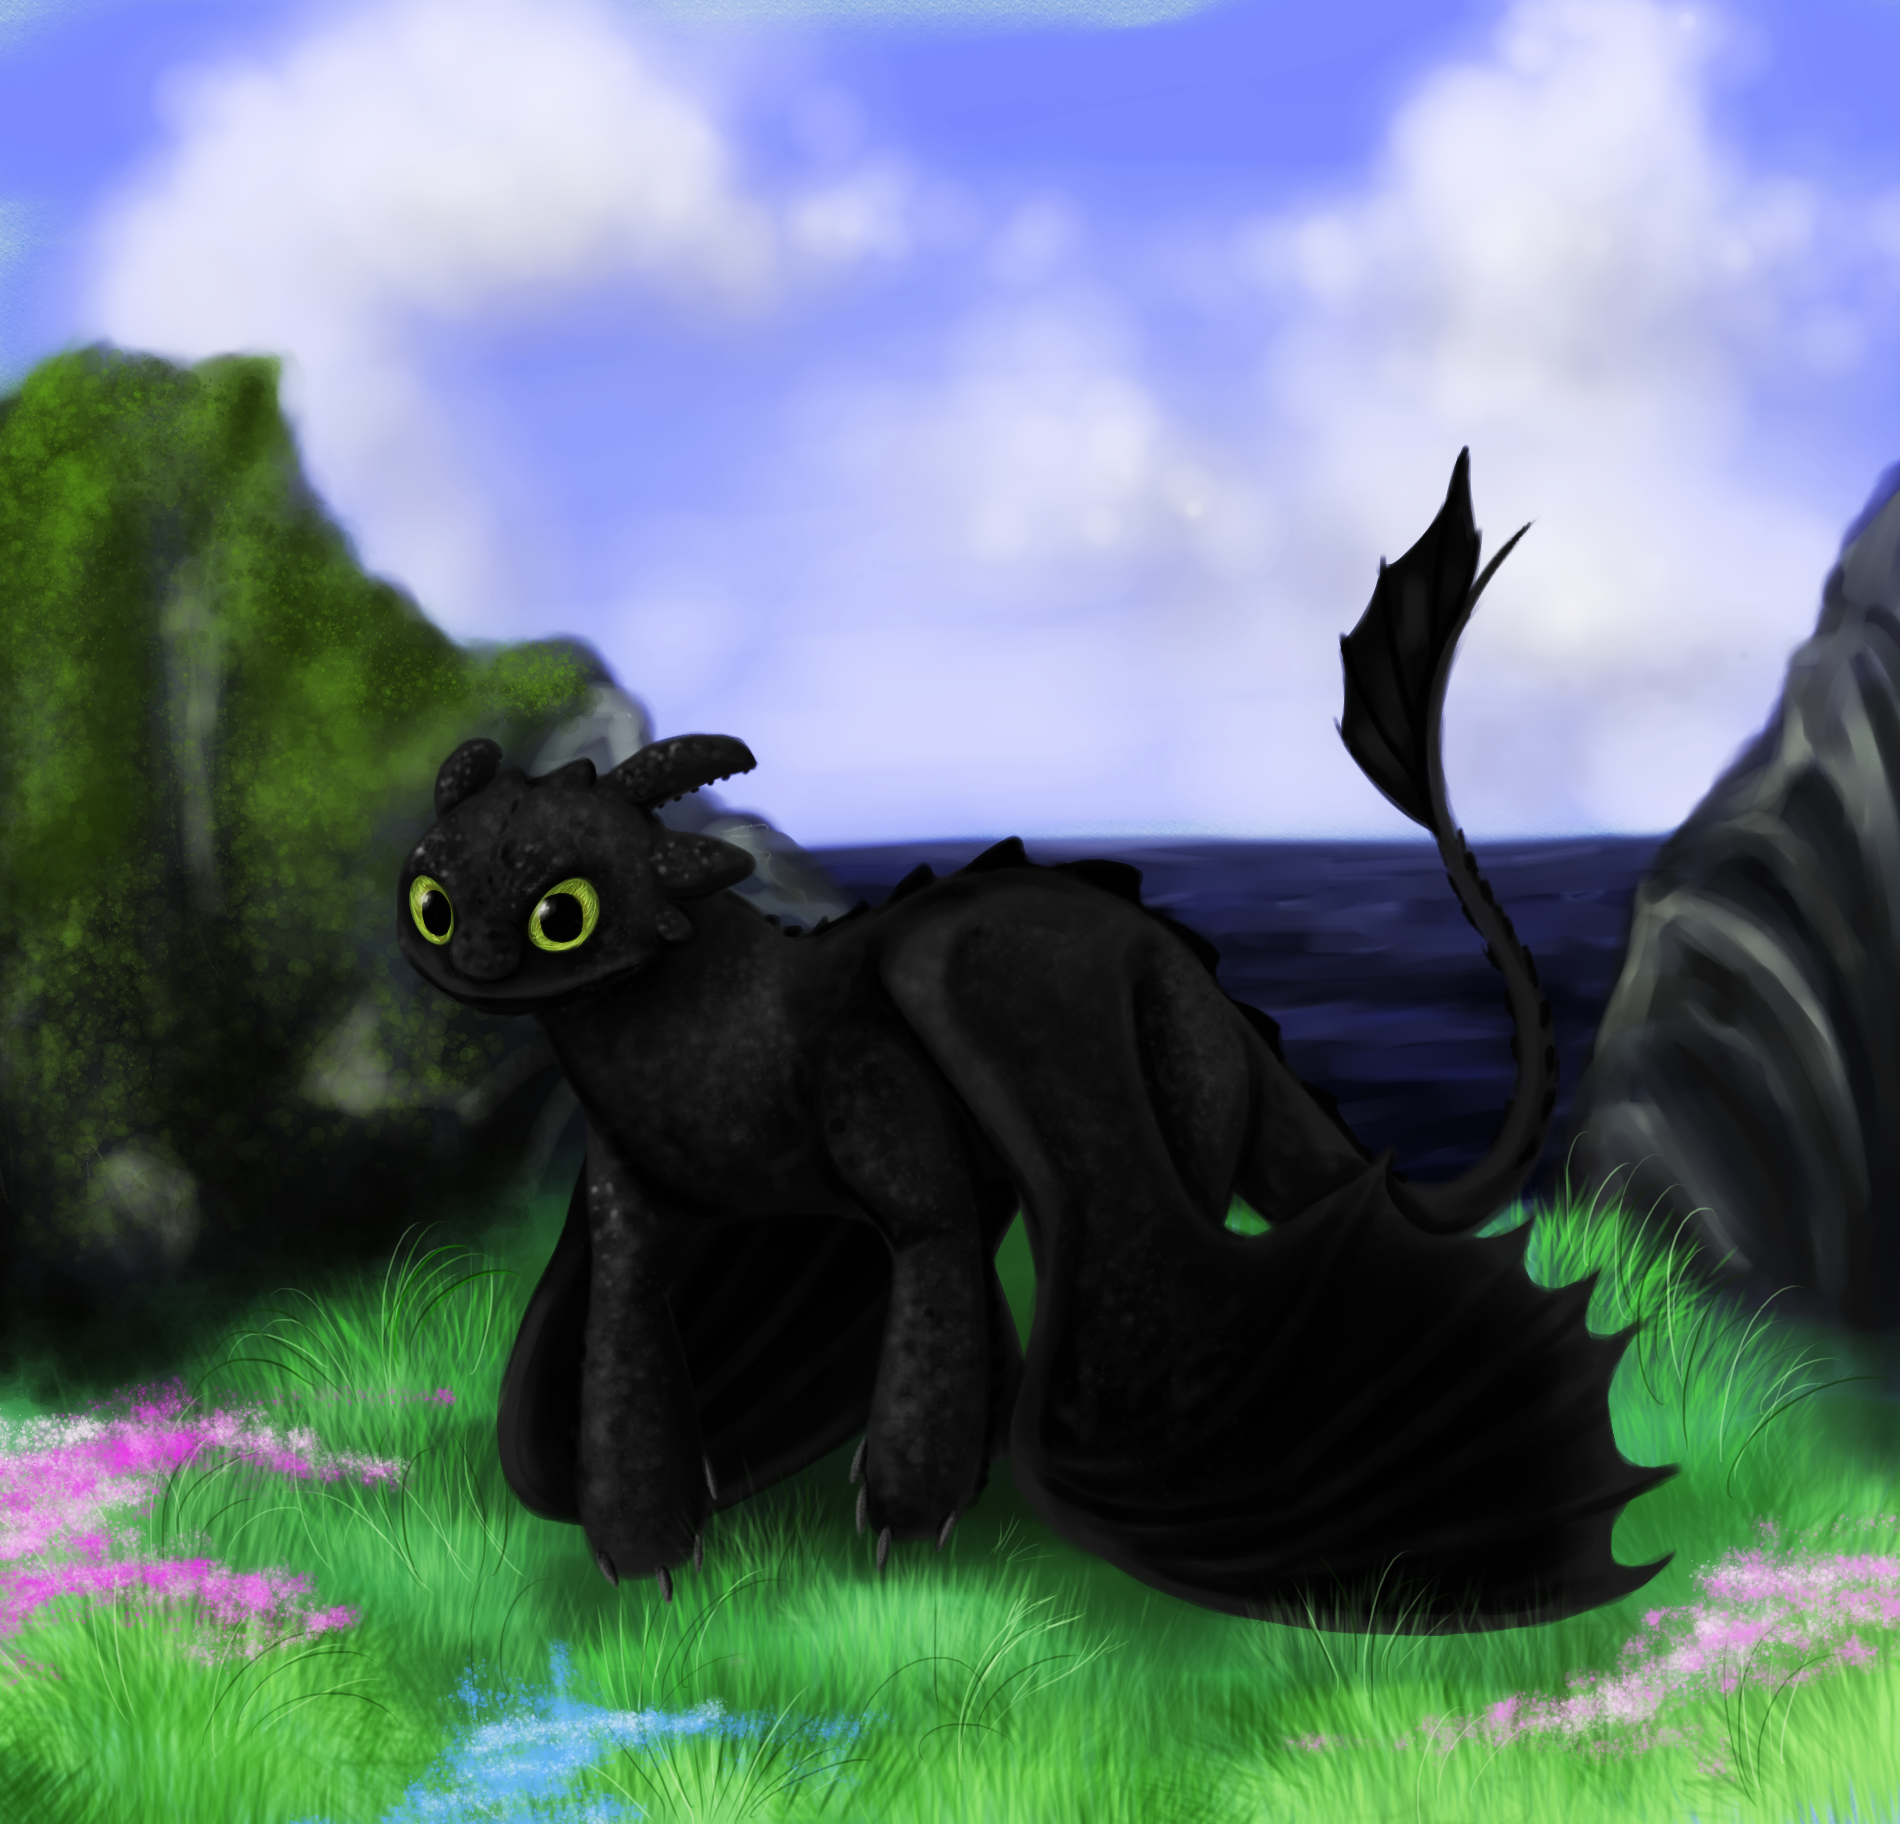 Toothless Say Wut? by Stalcry